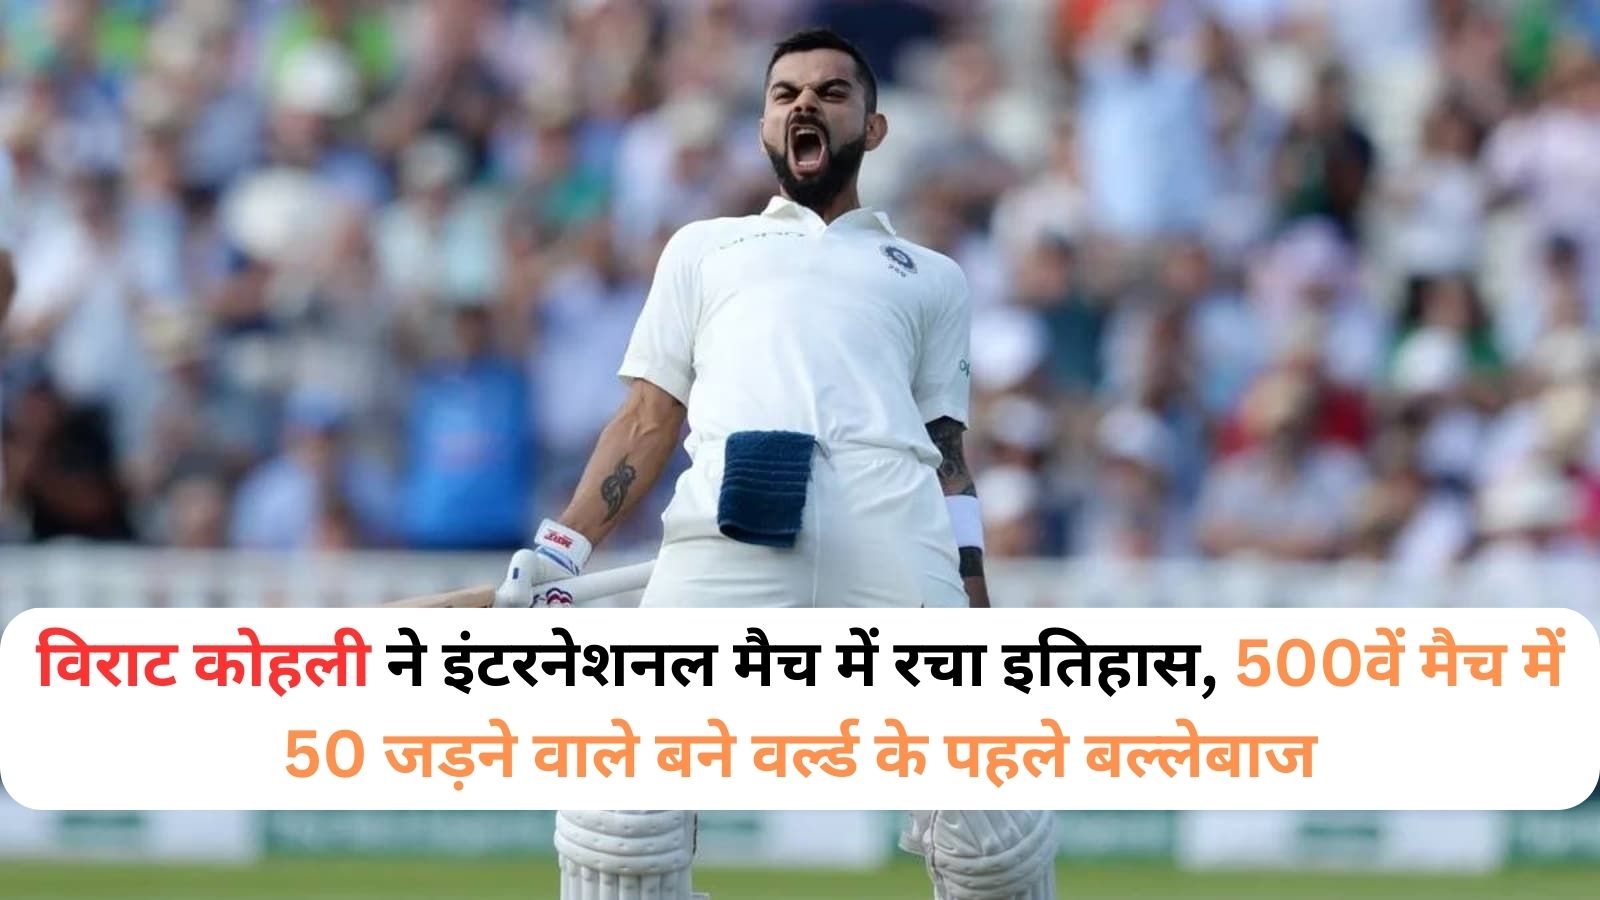 Virat Kohli created history in the international match became the first batsman in the world to score 50 in the 500th match